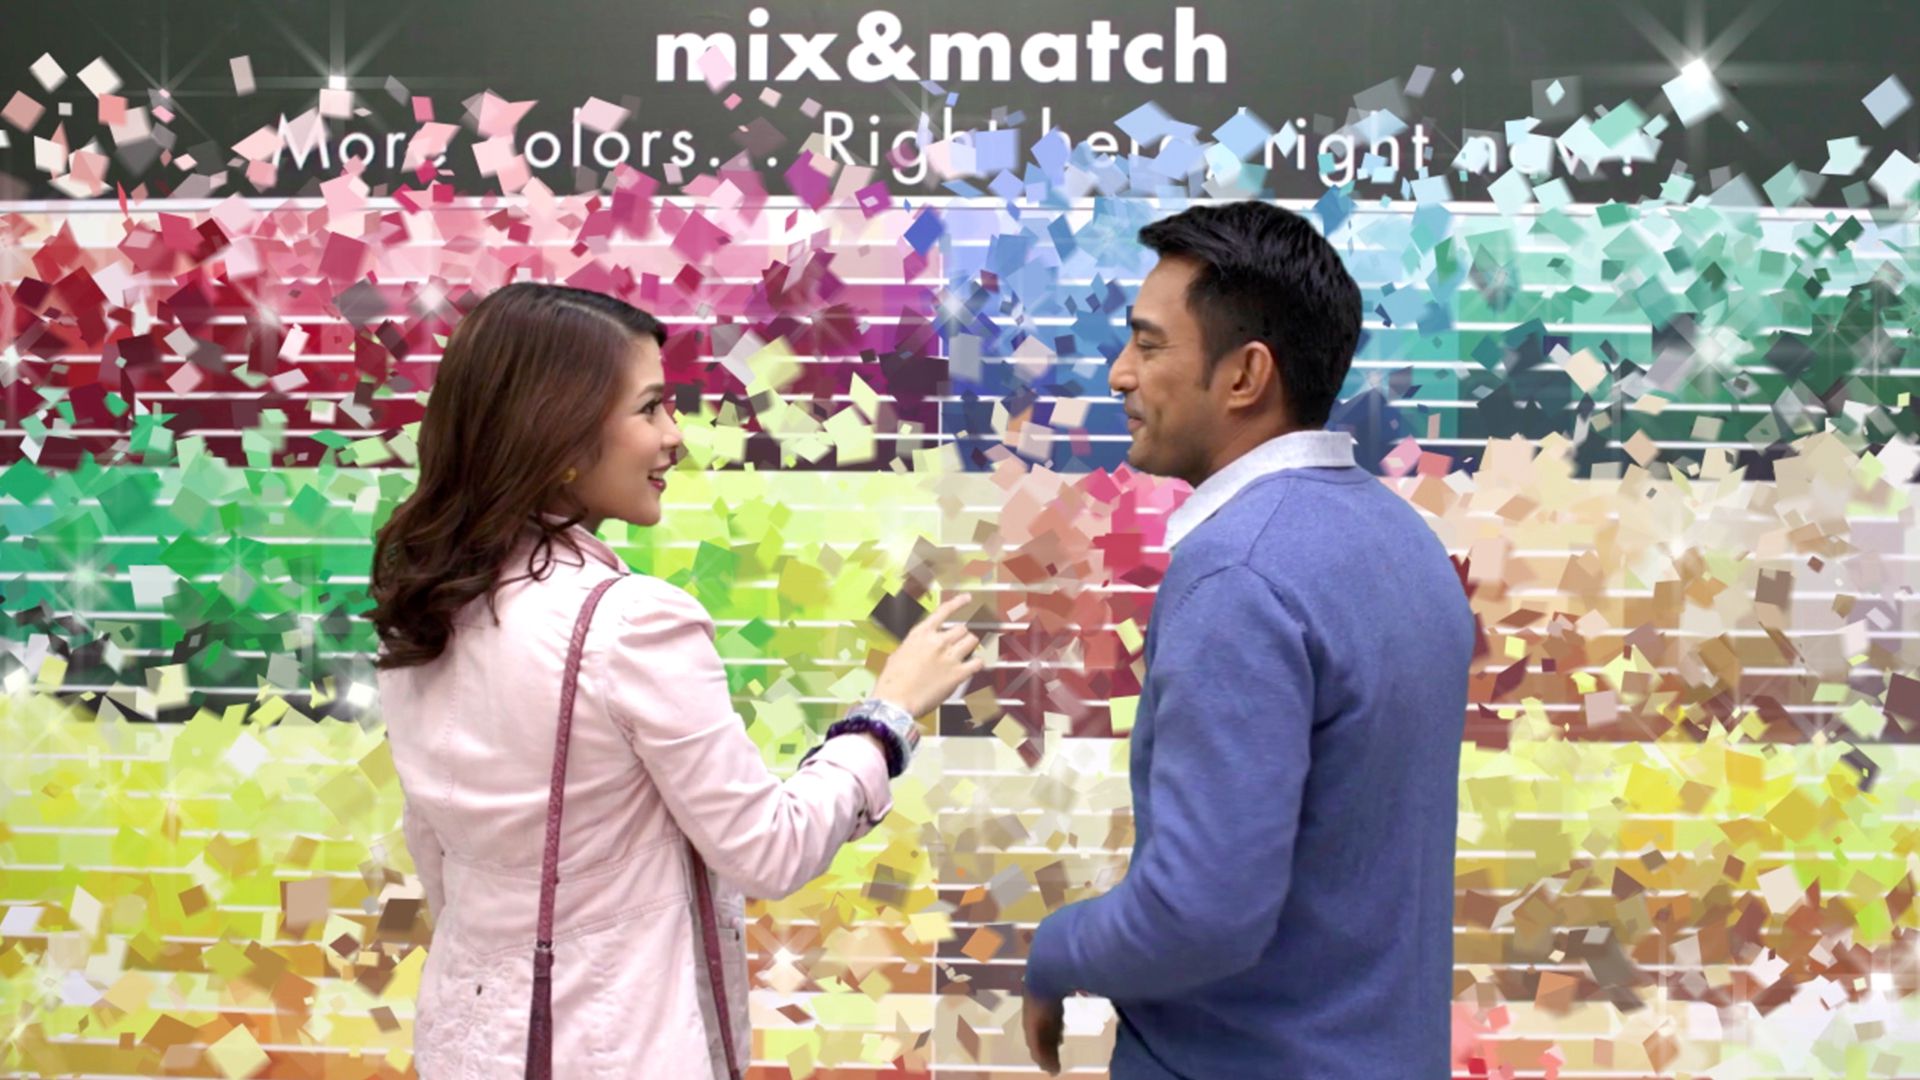 BOYSEN Mix & Match “Love Our Colors” video